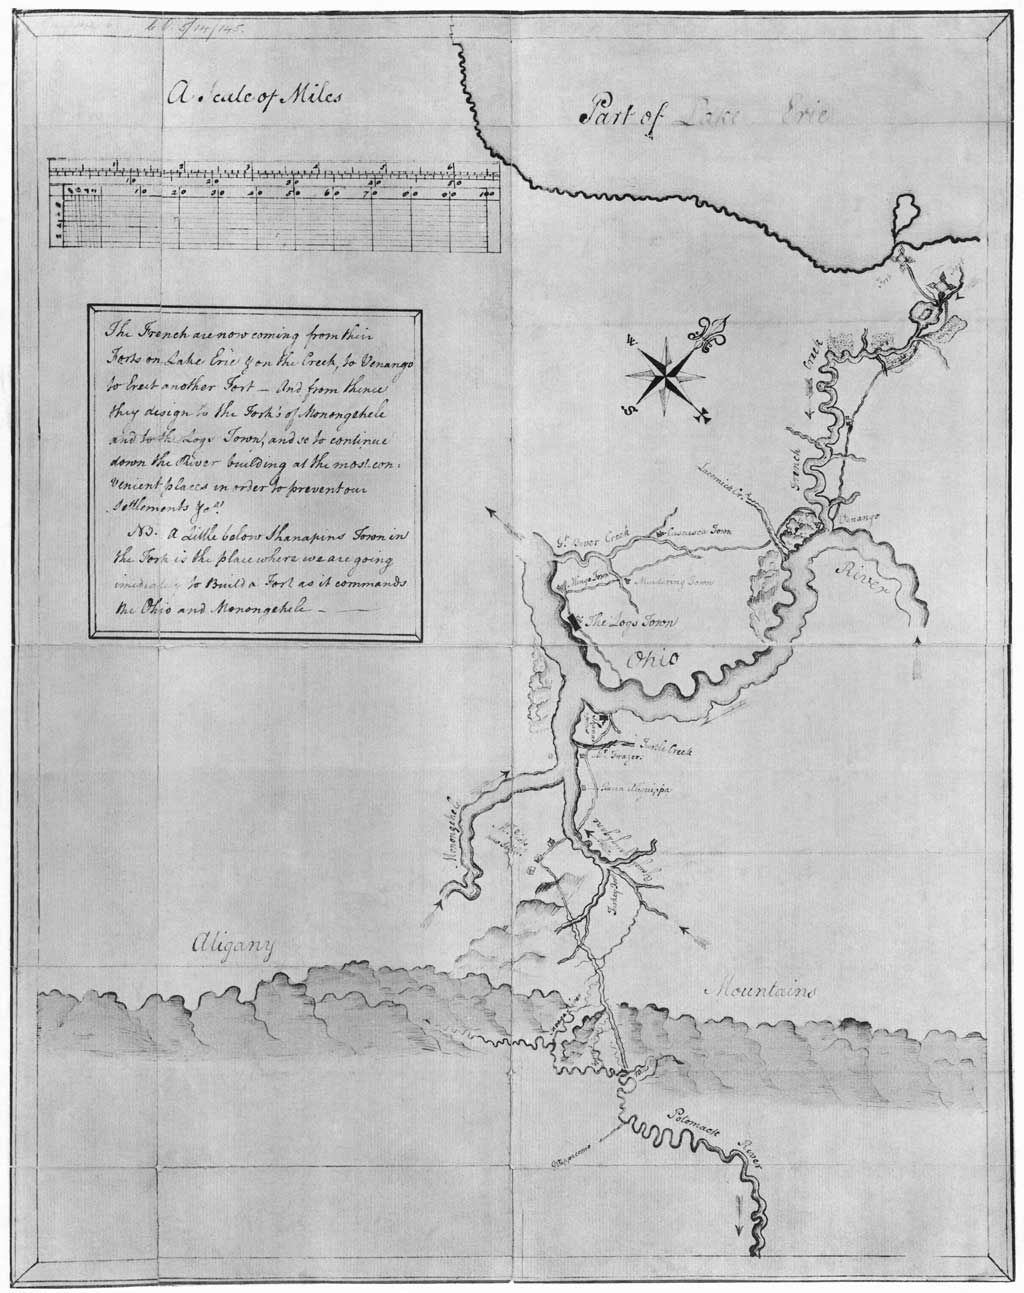 George Washington's hand-drawn map of the Ohio River and surrounding region containing notes on French intentions, 1753 or 1754